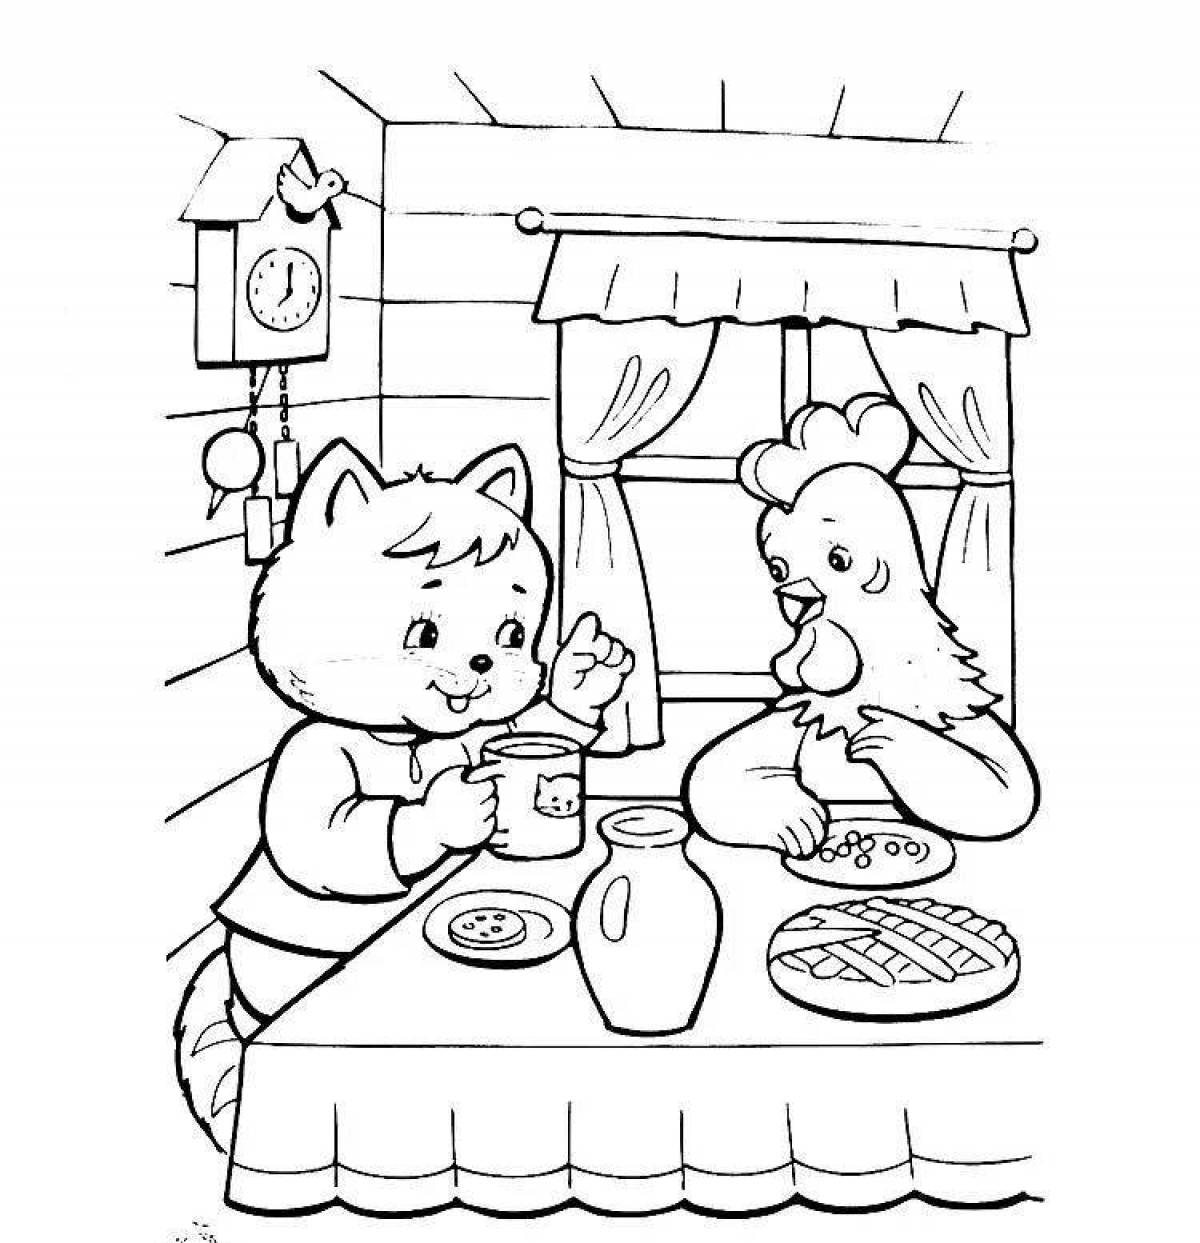 Naughty fox coloring page